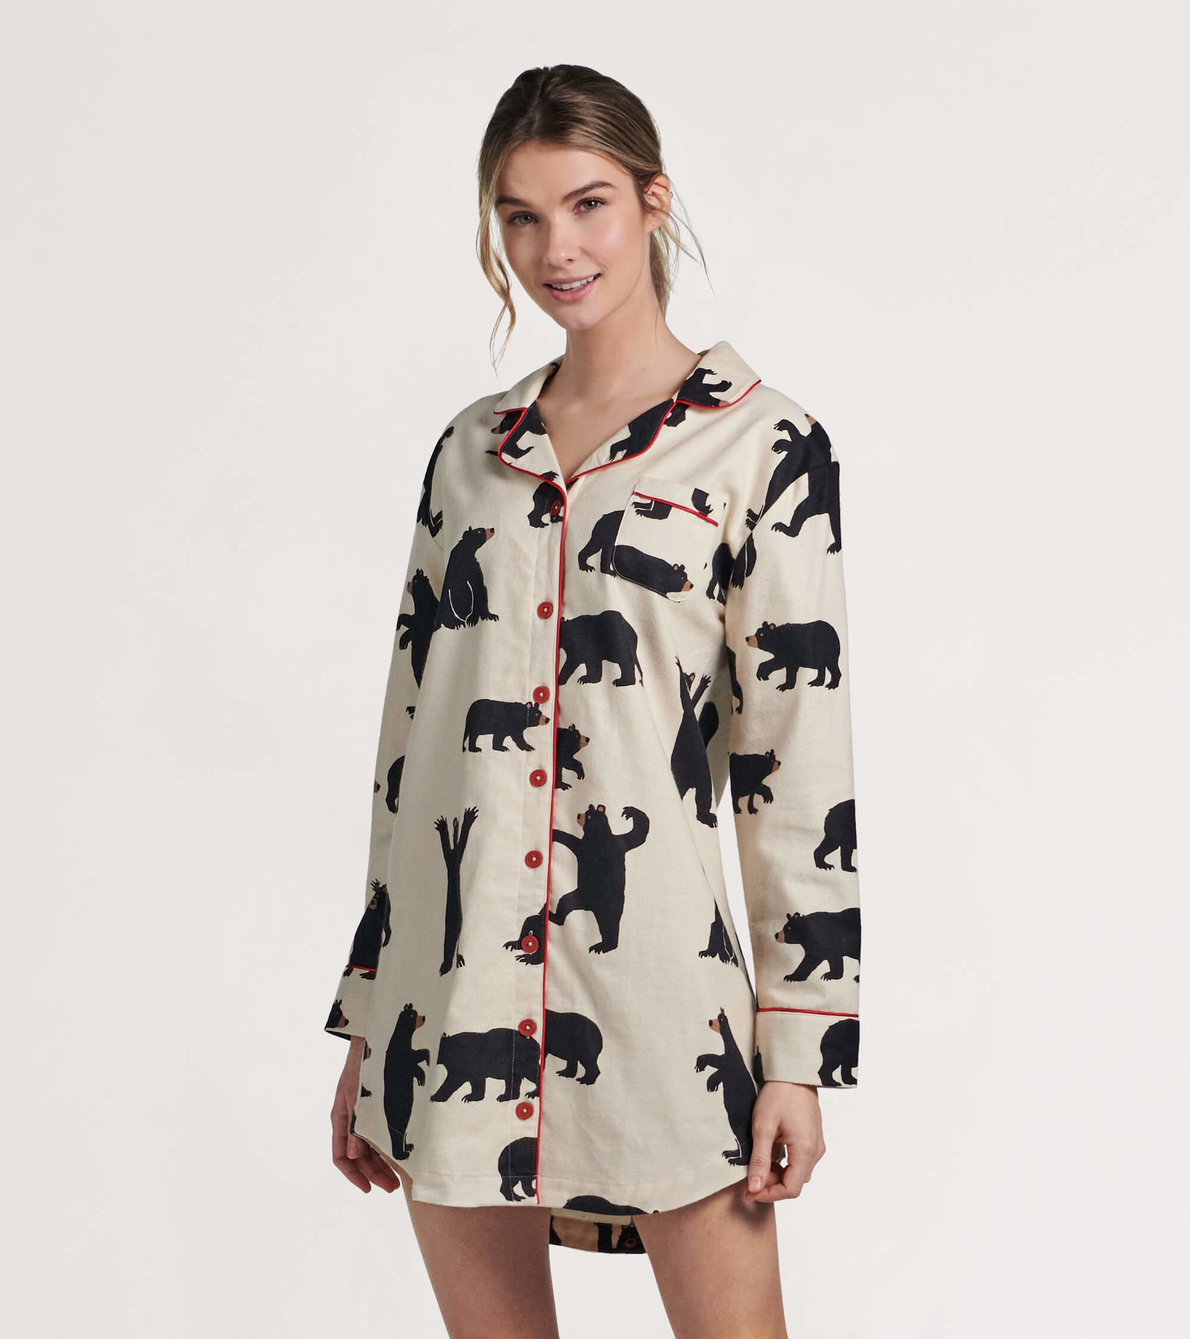 View larger image of Women's Black Bears Flannel Nightgown